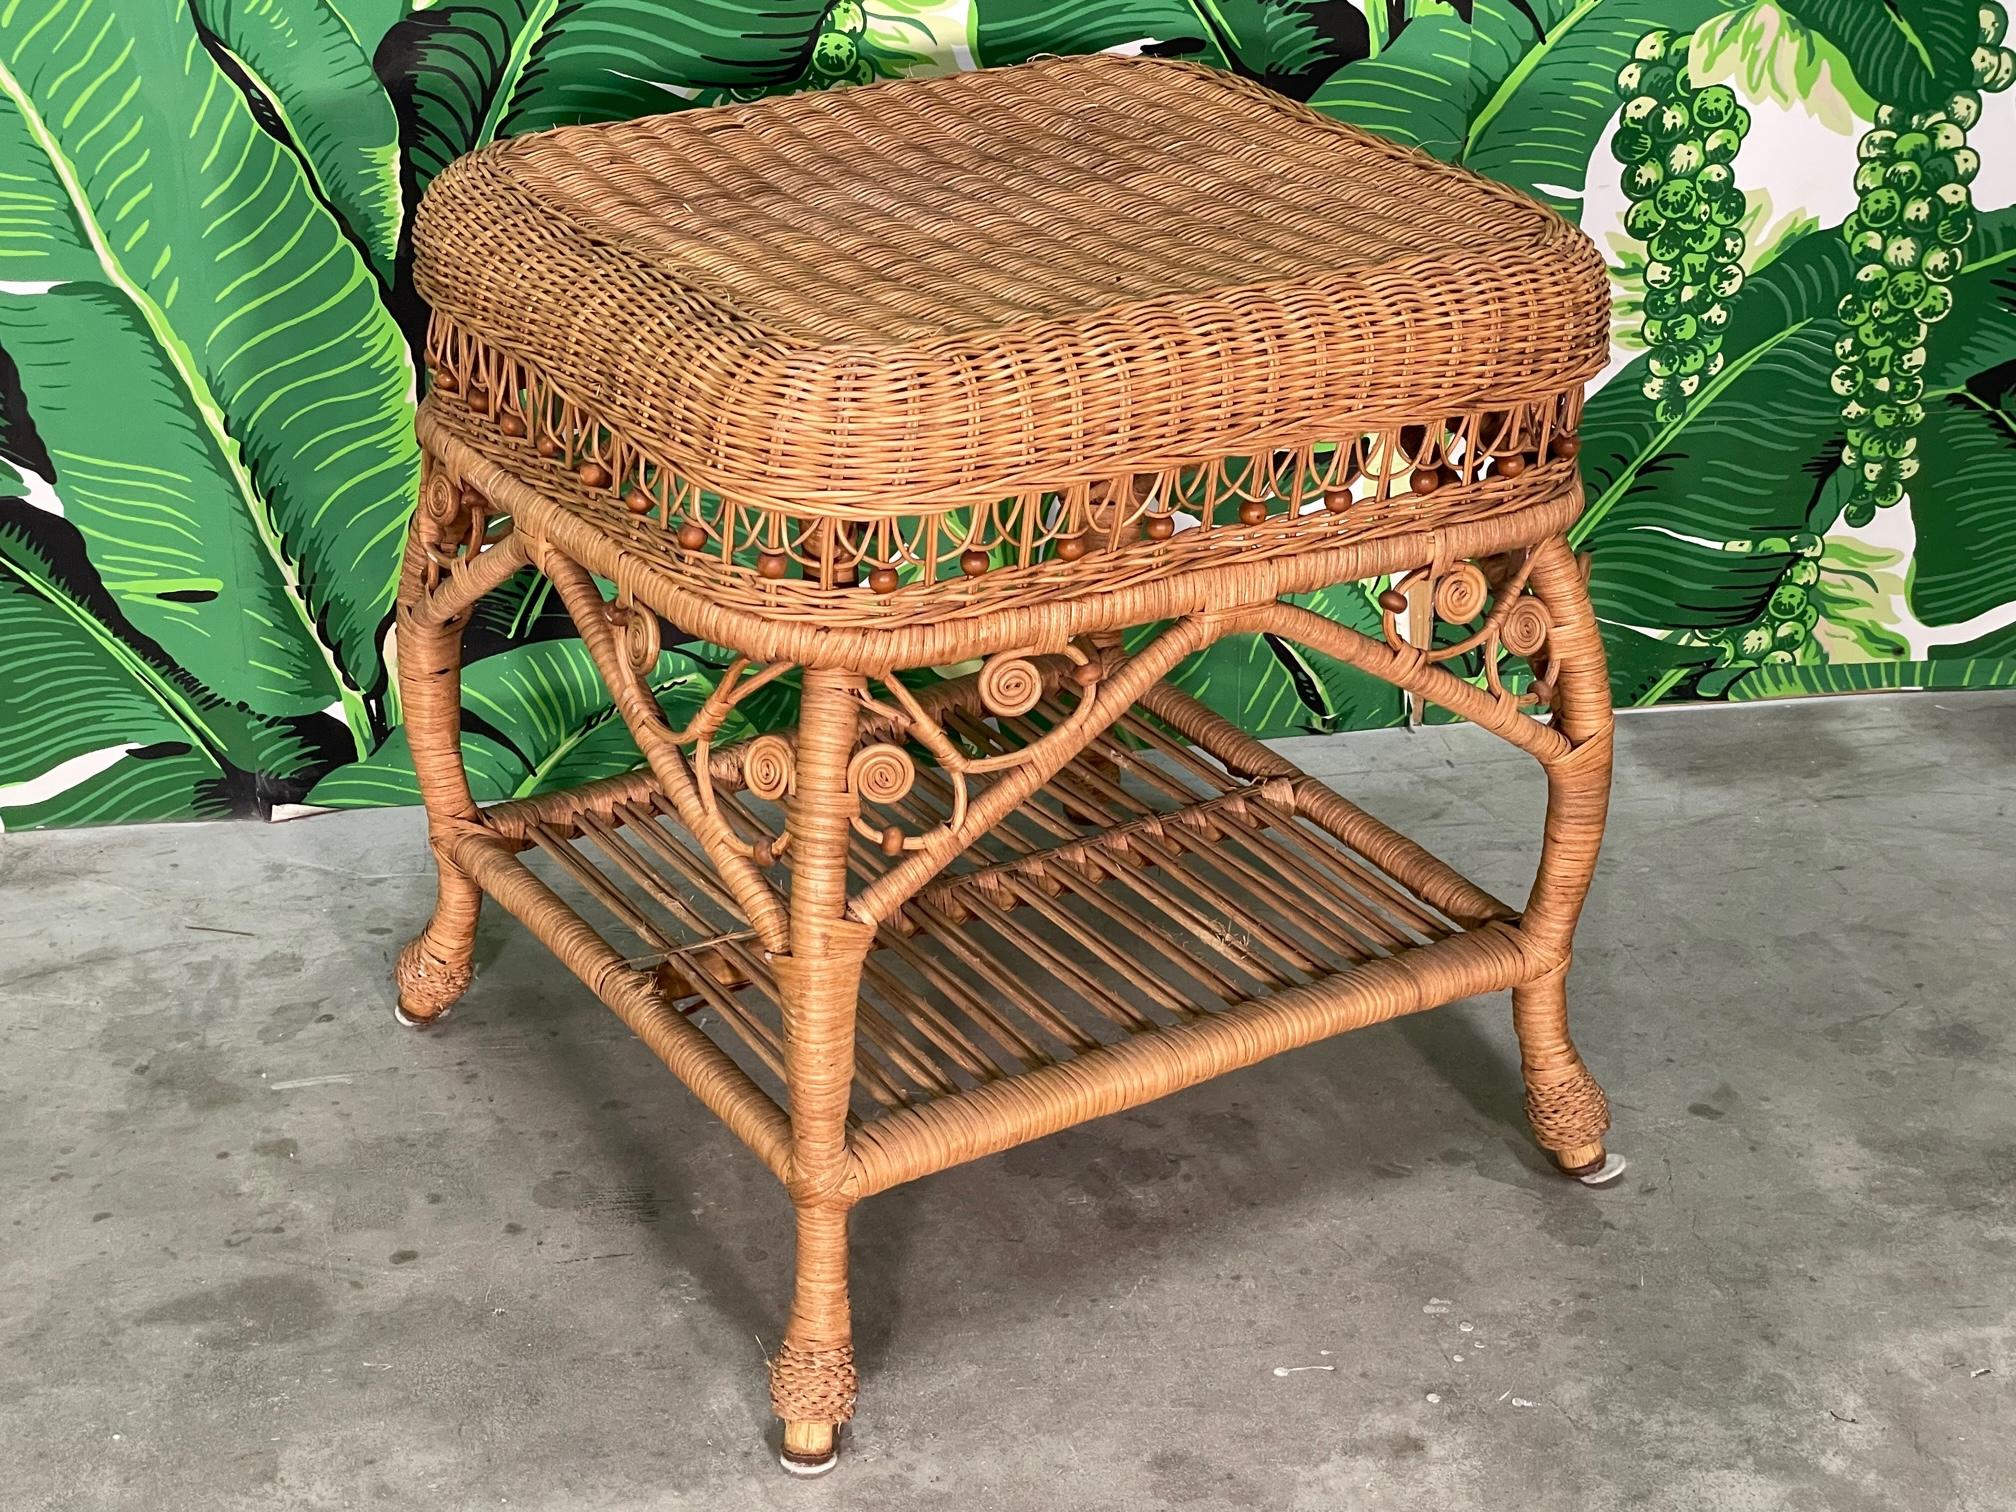 Vintage wicker footstool features classic fiddlehead design. Good condition with imperfections consistent with age, see photos for condition details.
For a shipping quote to your exact zip code, please message us.

